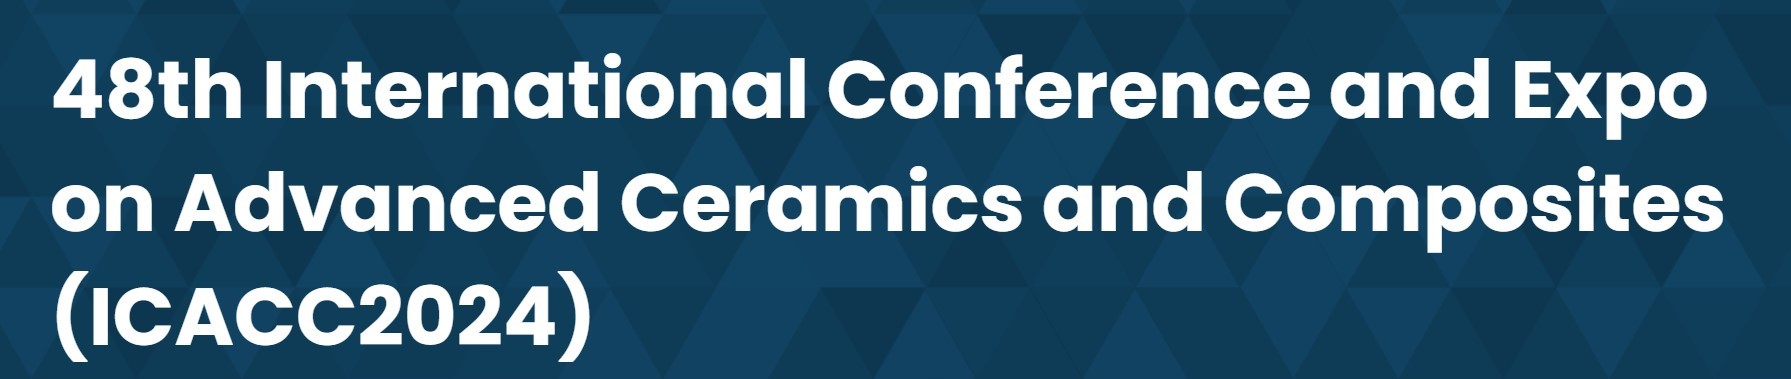 48th International Conference and Expo on Advanced Ceramics and Composites (ICACC2024)